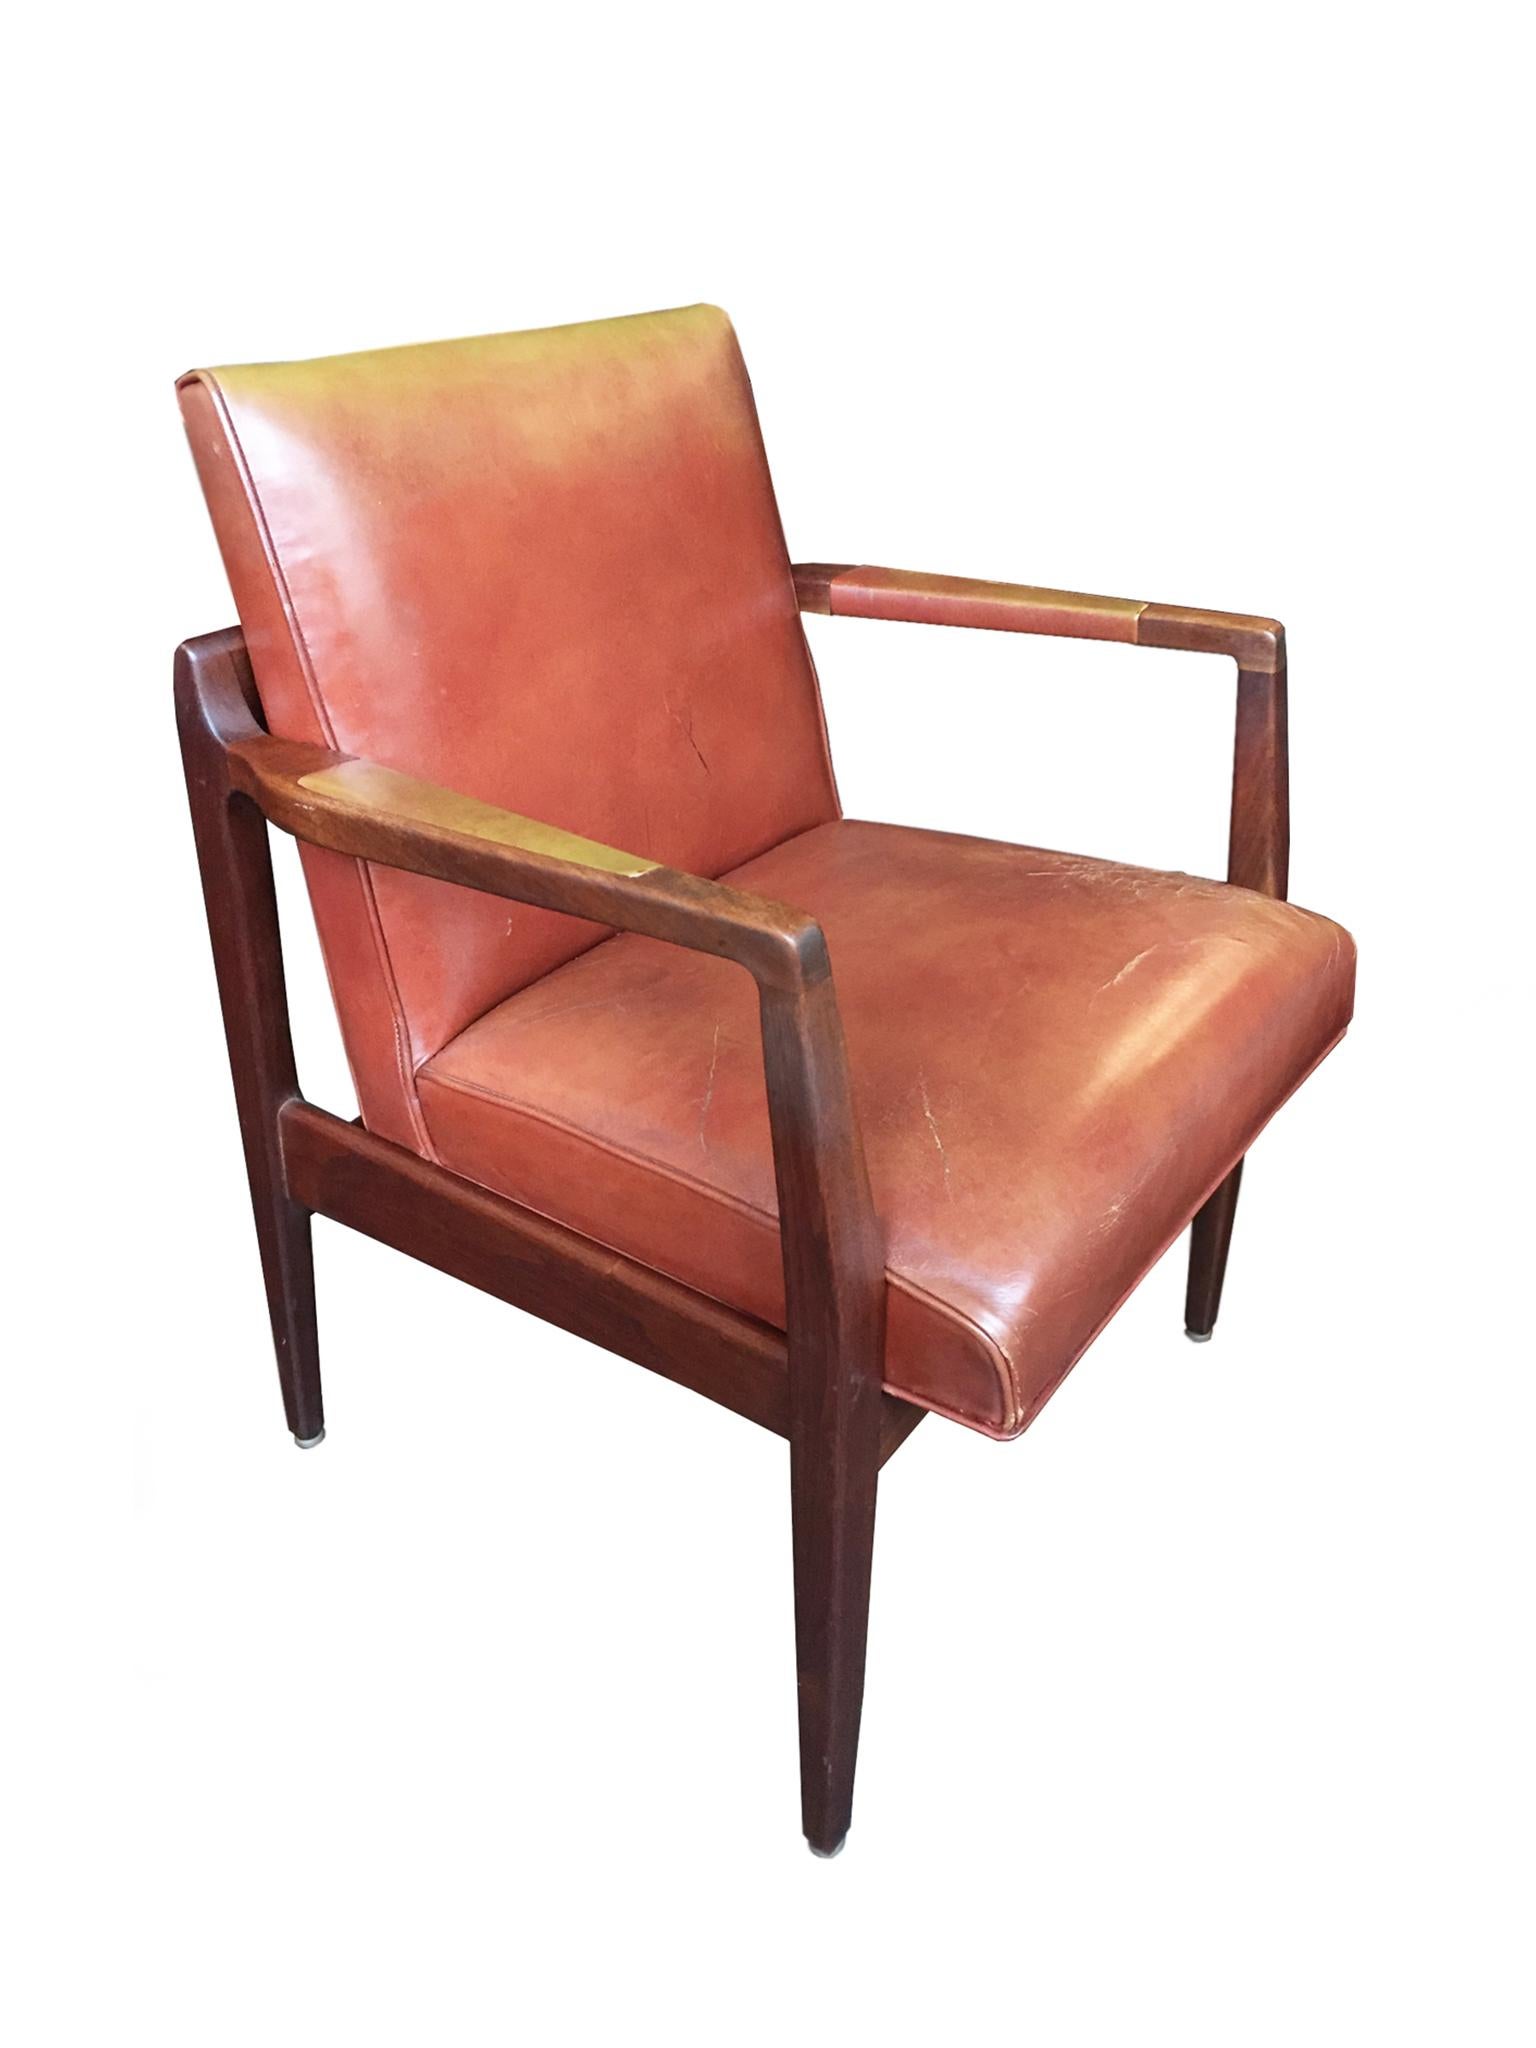 These two armchairs were designed and manufactured circa 1950s-1960s. They are crafted in the manner of the Danish American designer, Jens Risom, who infused American Modernism with elements of Scandinavian design. The chairs are comprised of a